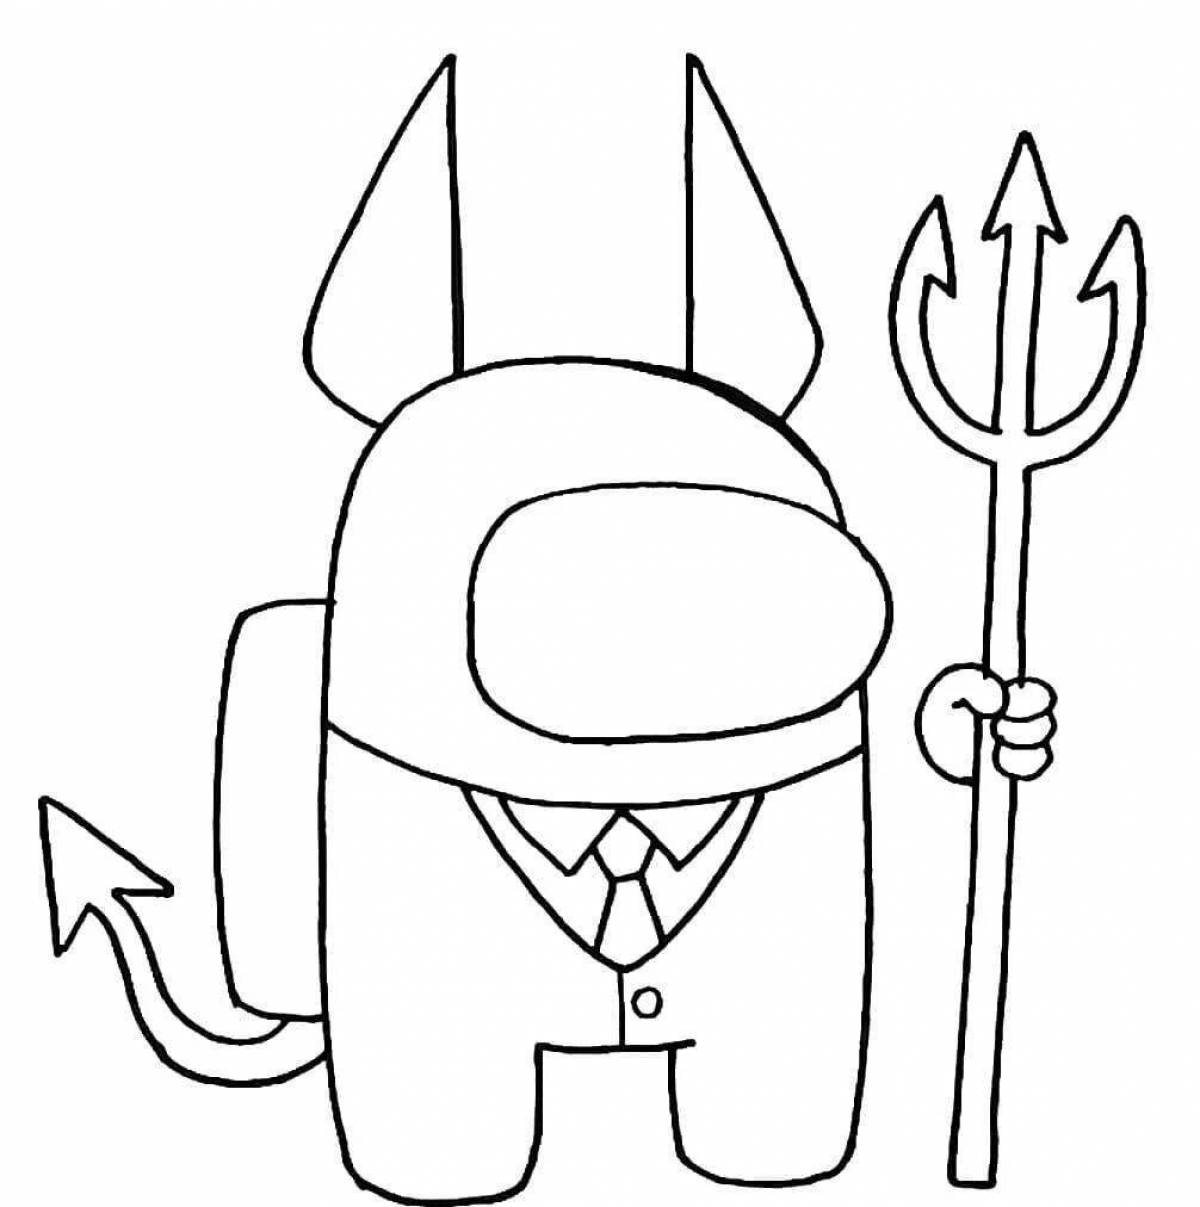 Glowing amangas coloring page